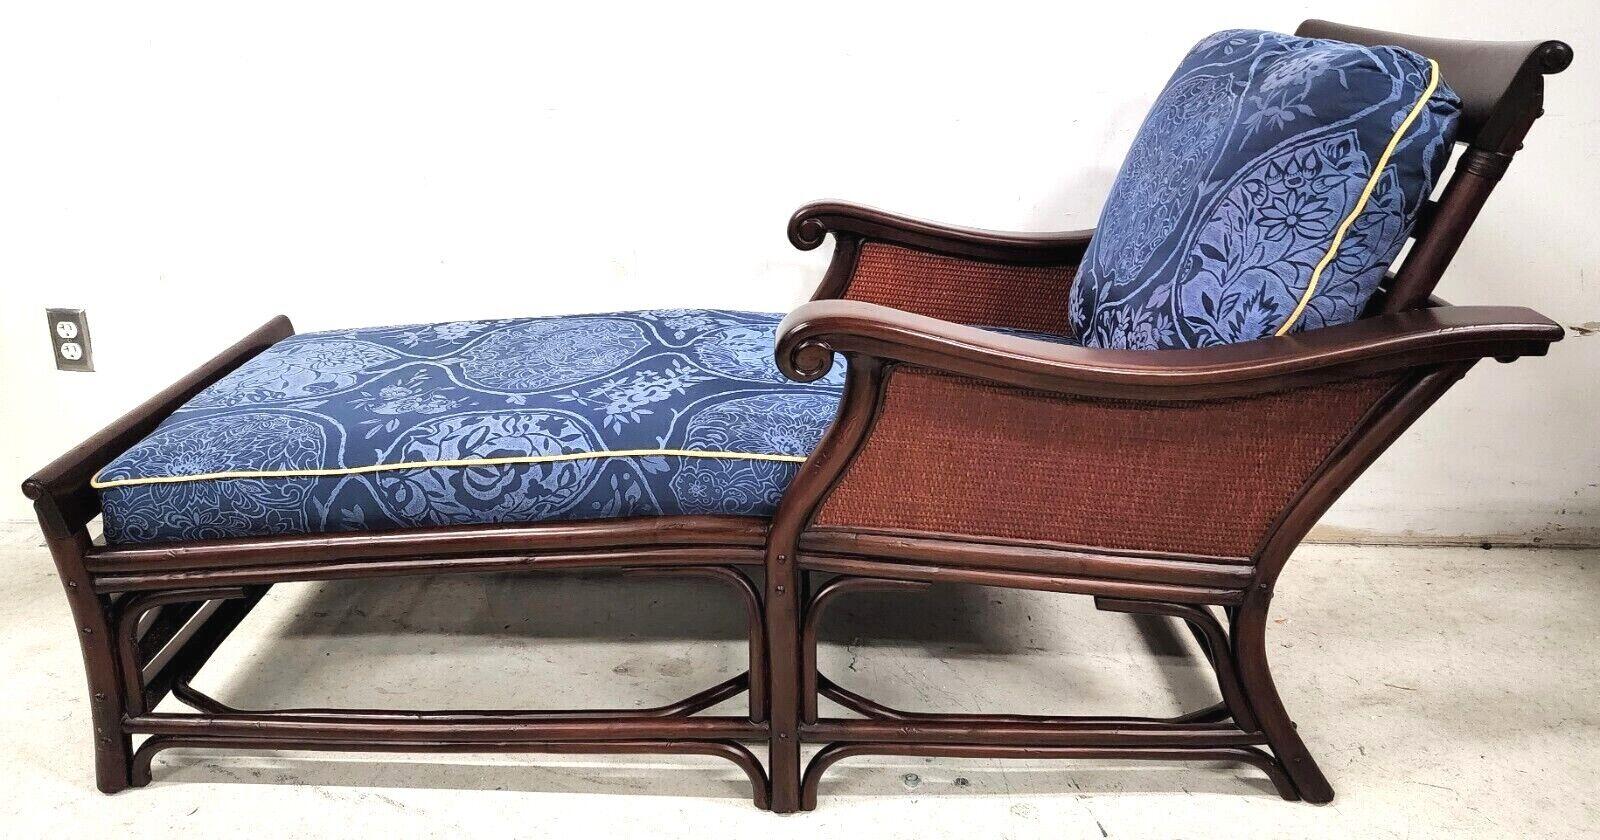 Offering One Of Our Recent Palm Beach Estate Fine Furniture Acquisitions Of 
A PALECEK Anglo Indian Style Solid Wood & Wicker Chaise Lounge

Approximate Measurements in Inches
35